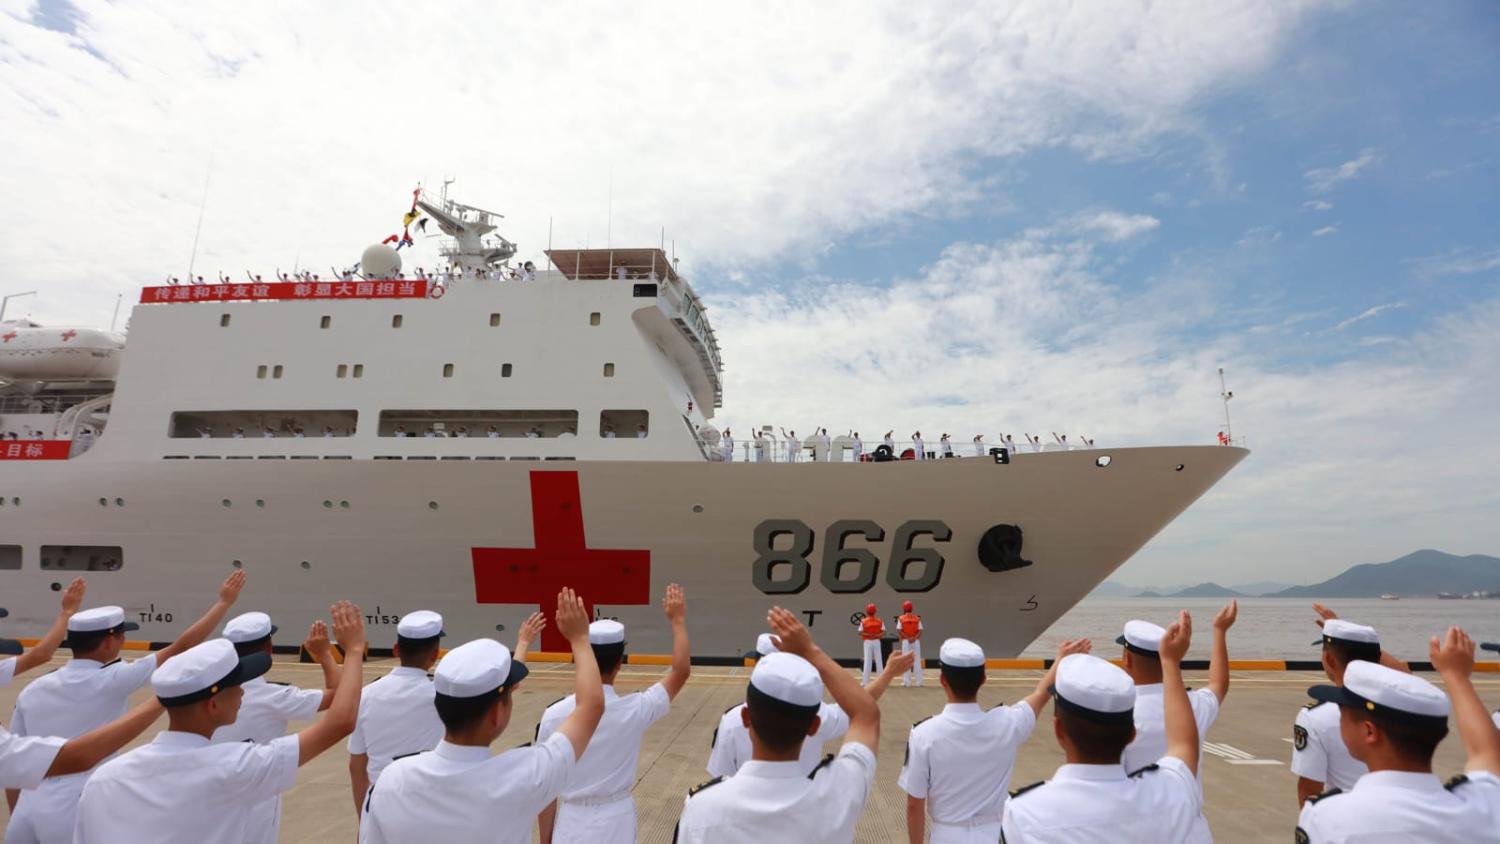 China's naval hospital ship "Peace Ark" sets sail from a port in Zhoushan, Zhejiang province, on 3 July (Han Lin/Xinhua via Getty Images)